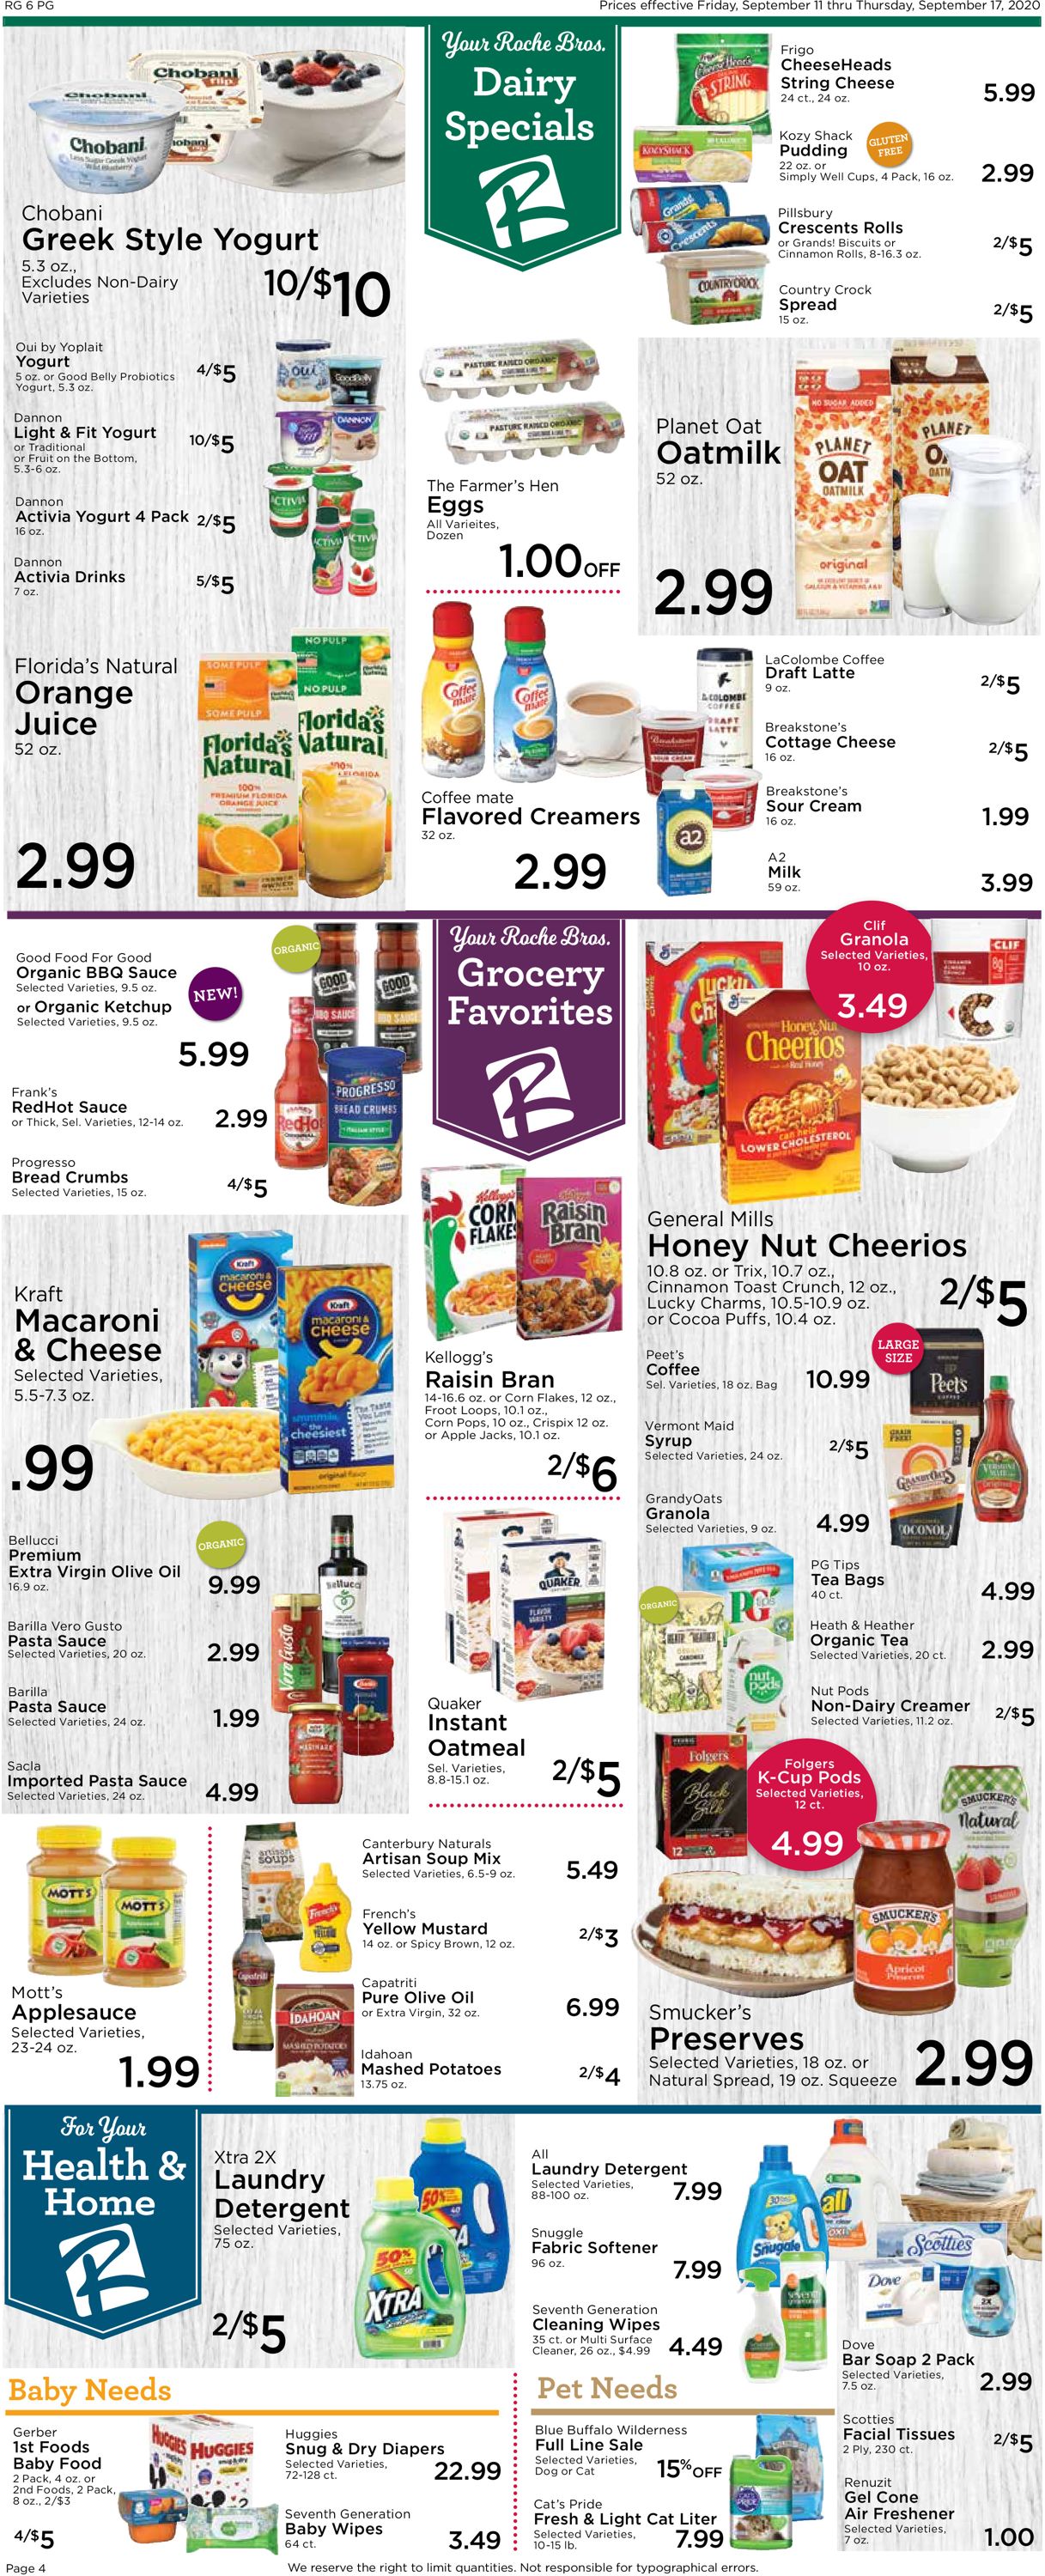 Catalogue Roche Bros. Supermarkets from 09/11/2020